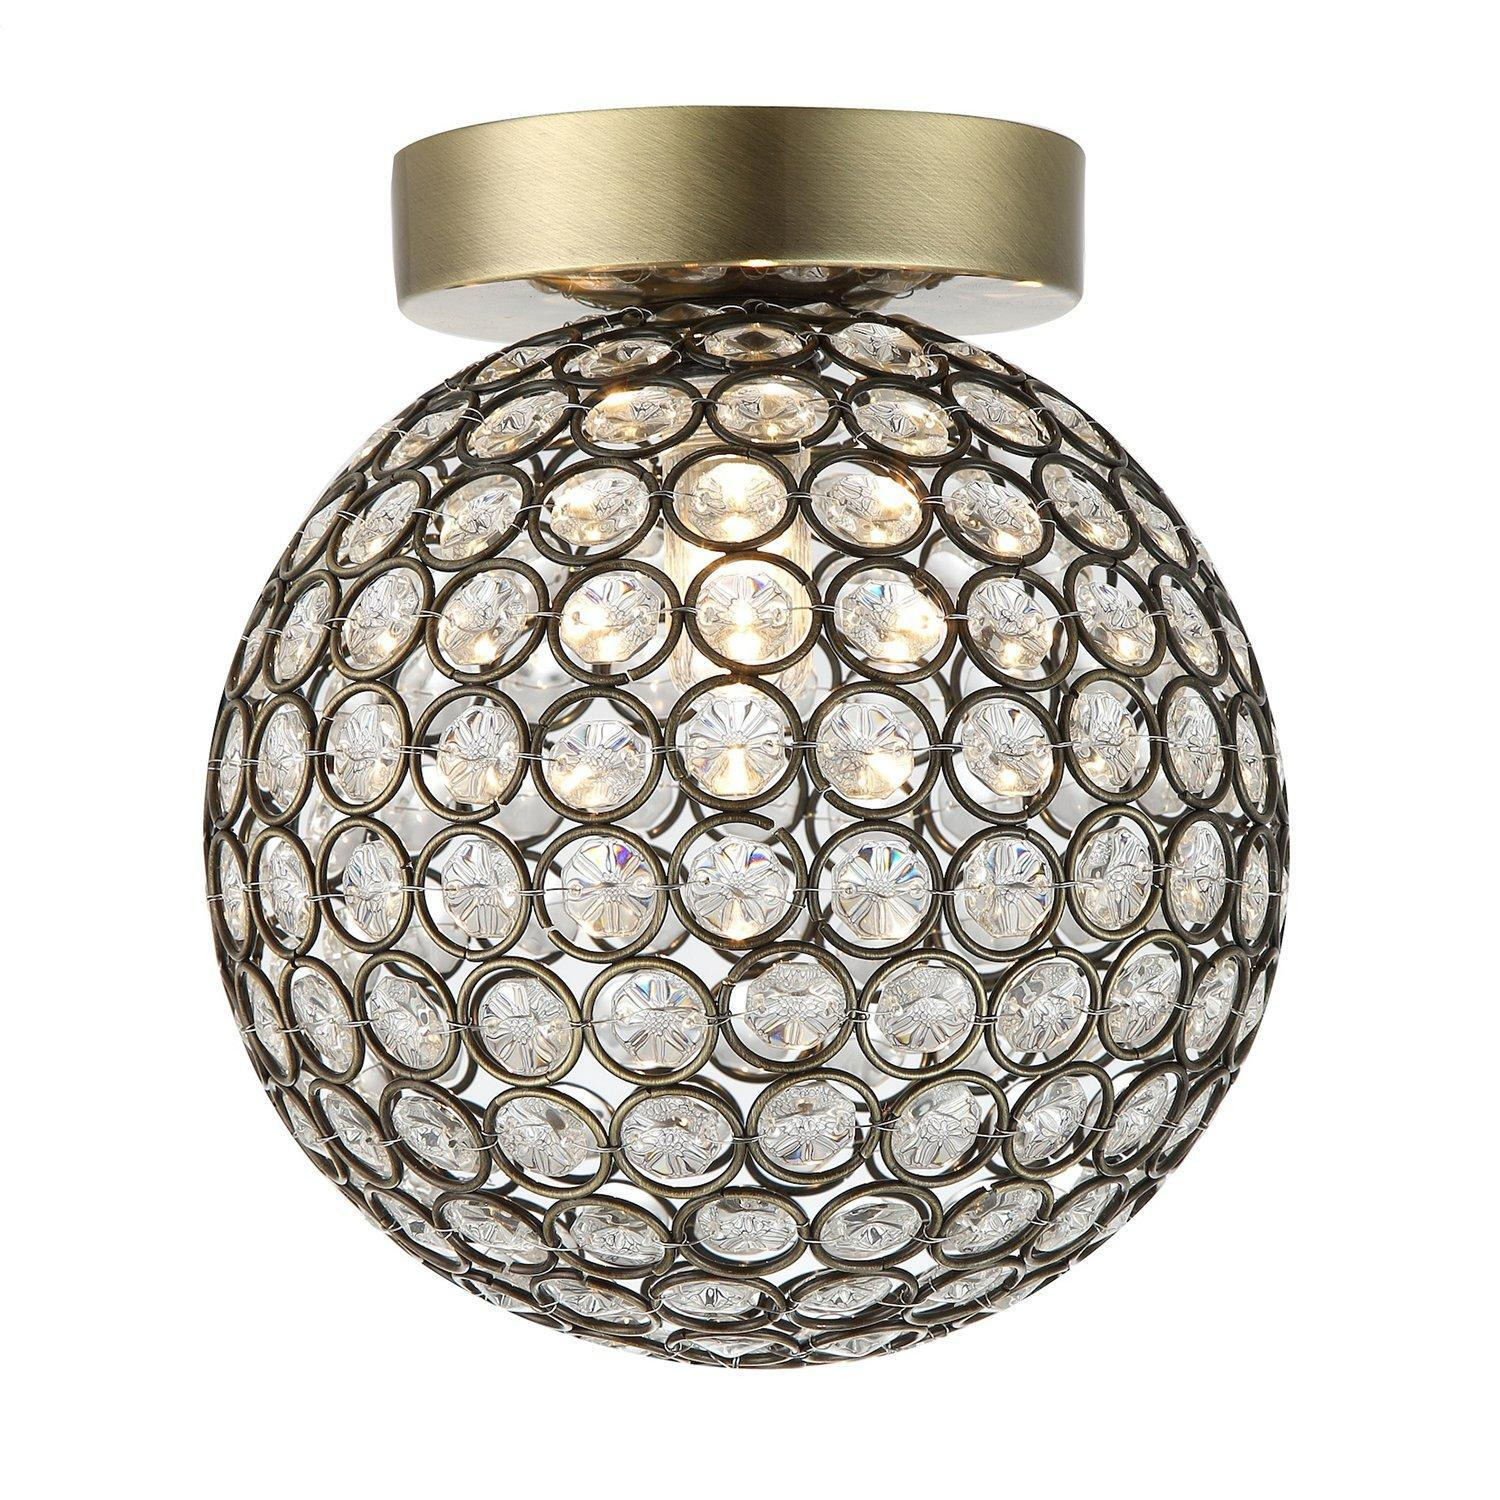 Modern Metal and Clear Beaded Glass IP44 Rated Bathroom Ceiling Light - image 1